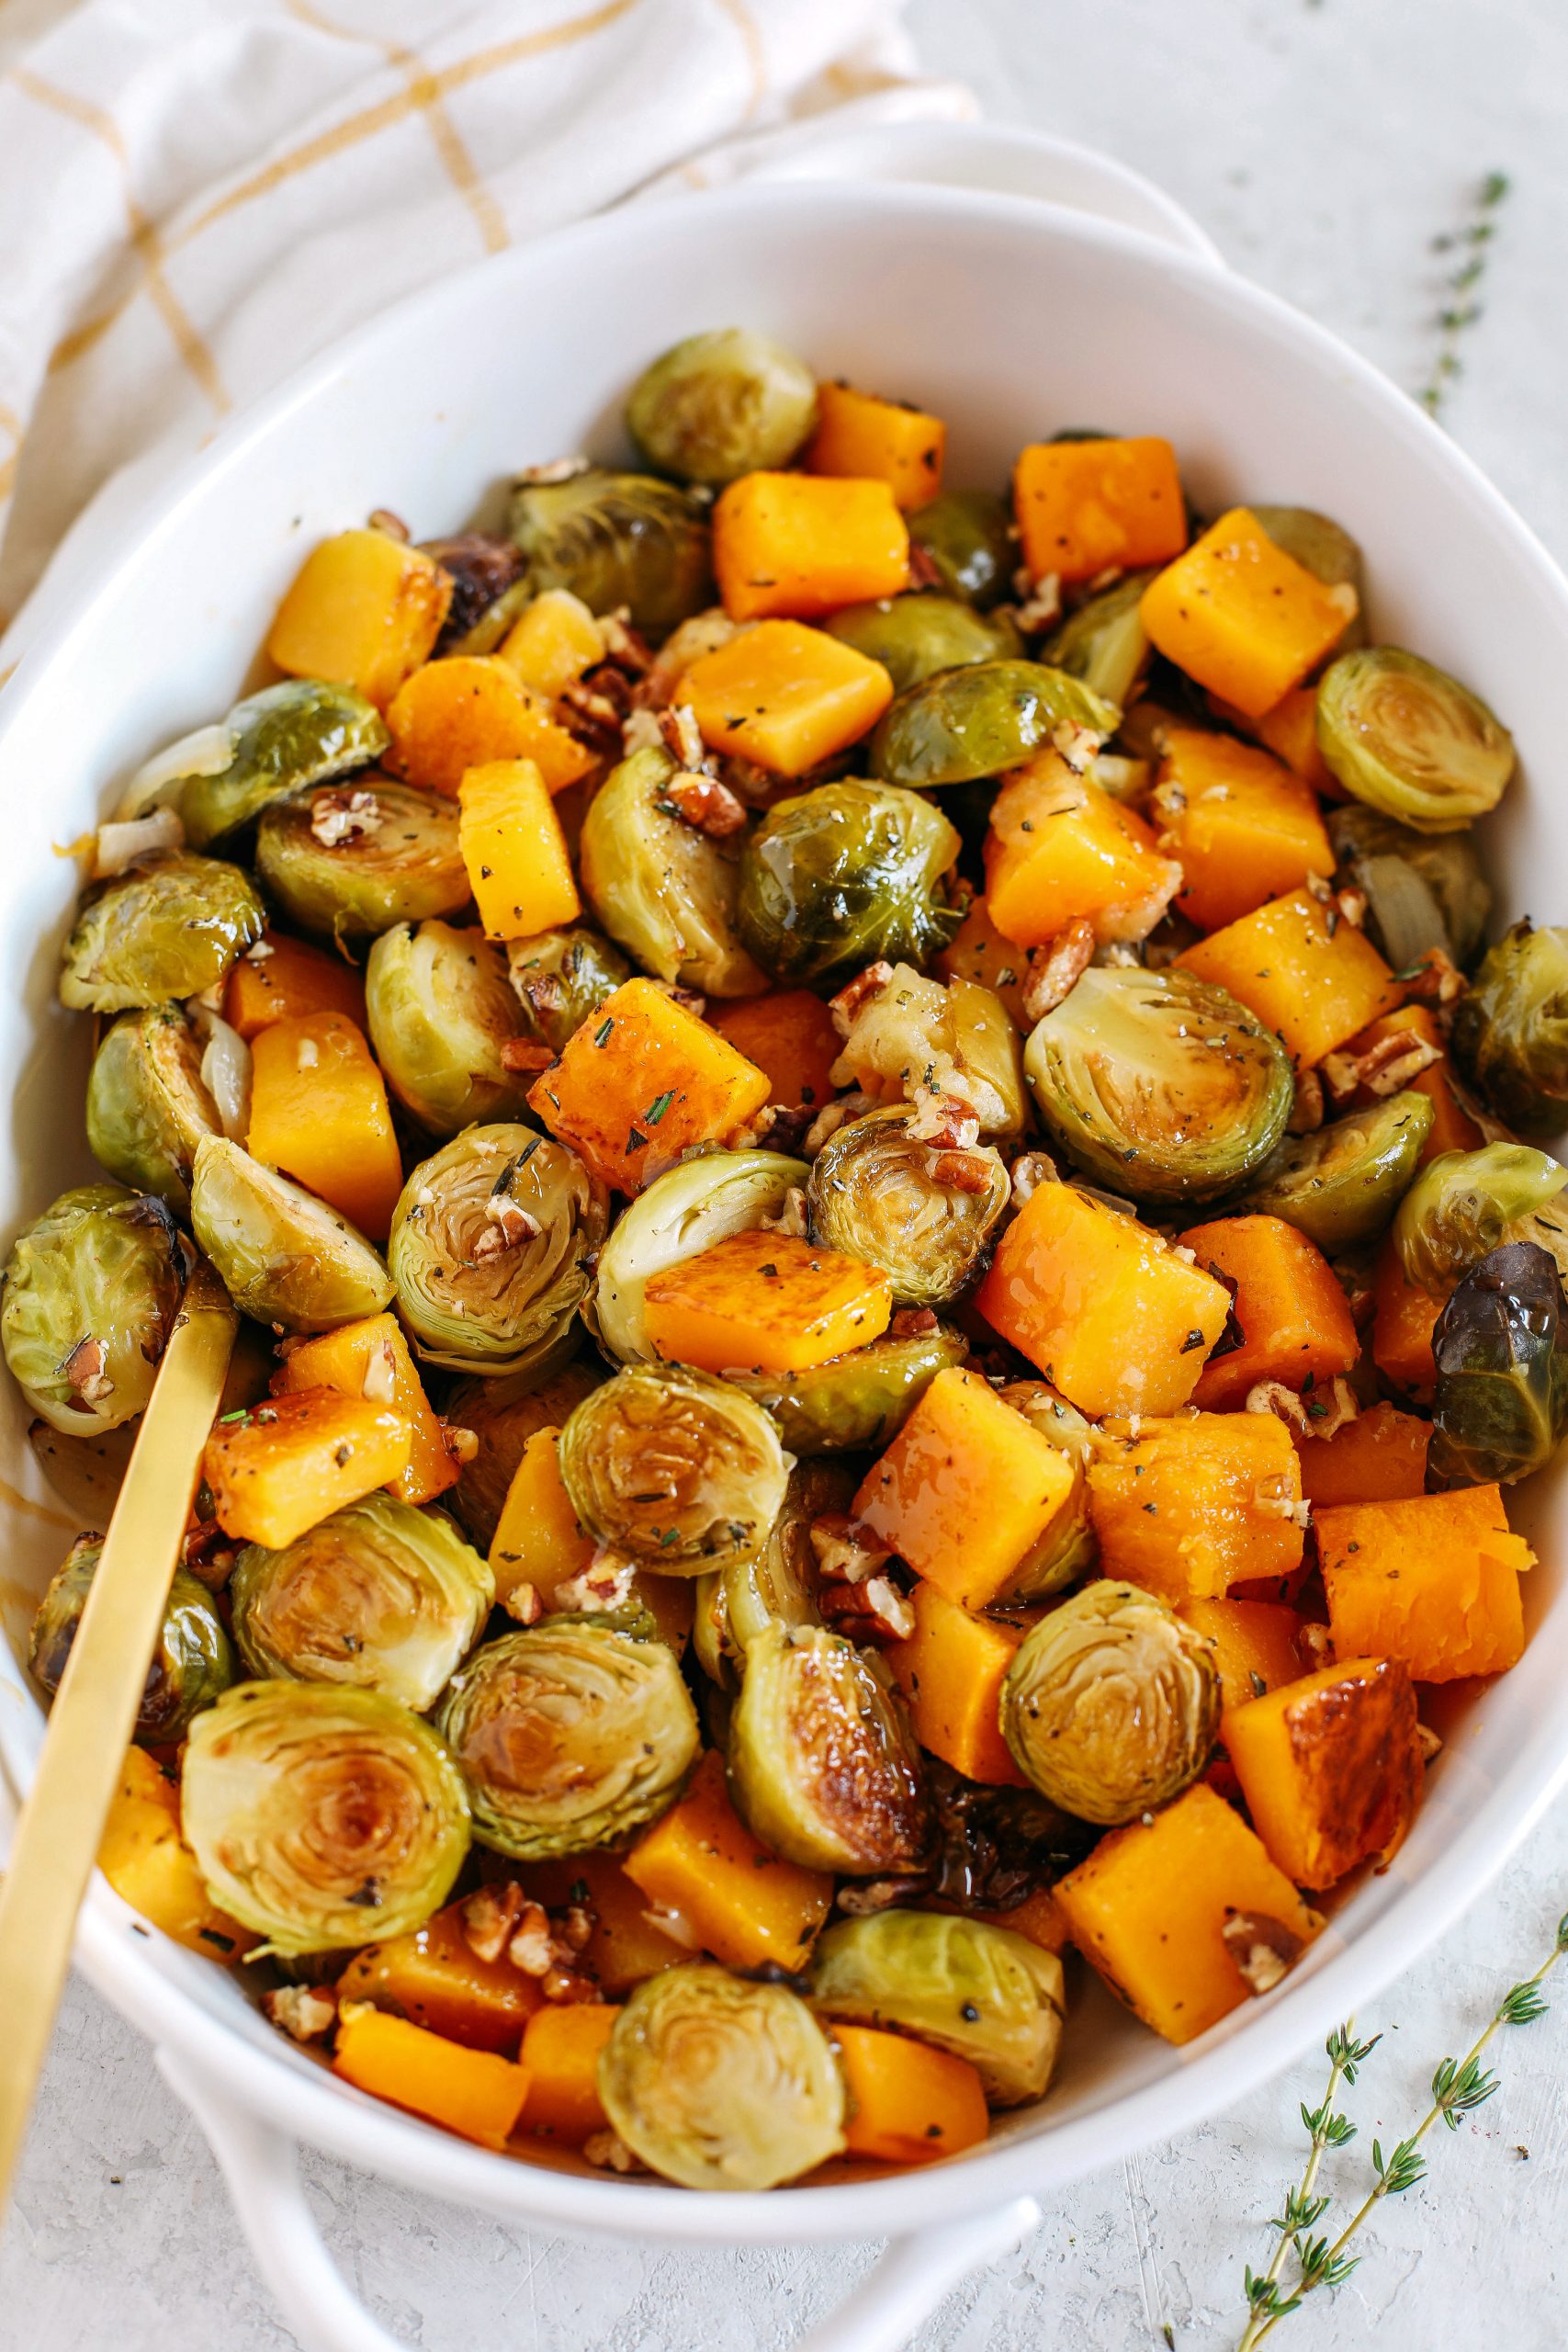 Roasted butternut squash, brussels sprouts and apples all tossed together with fresh herbs, chopped pecans and drizzled with a delicious maple dijon glaze!  The perfect side dish to your holiday meal!